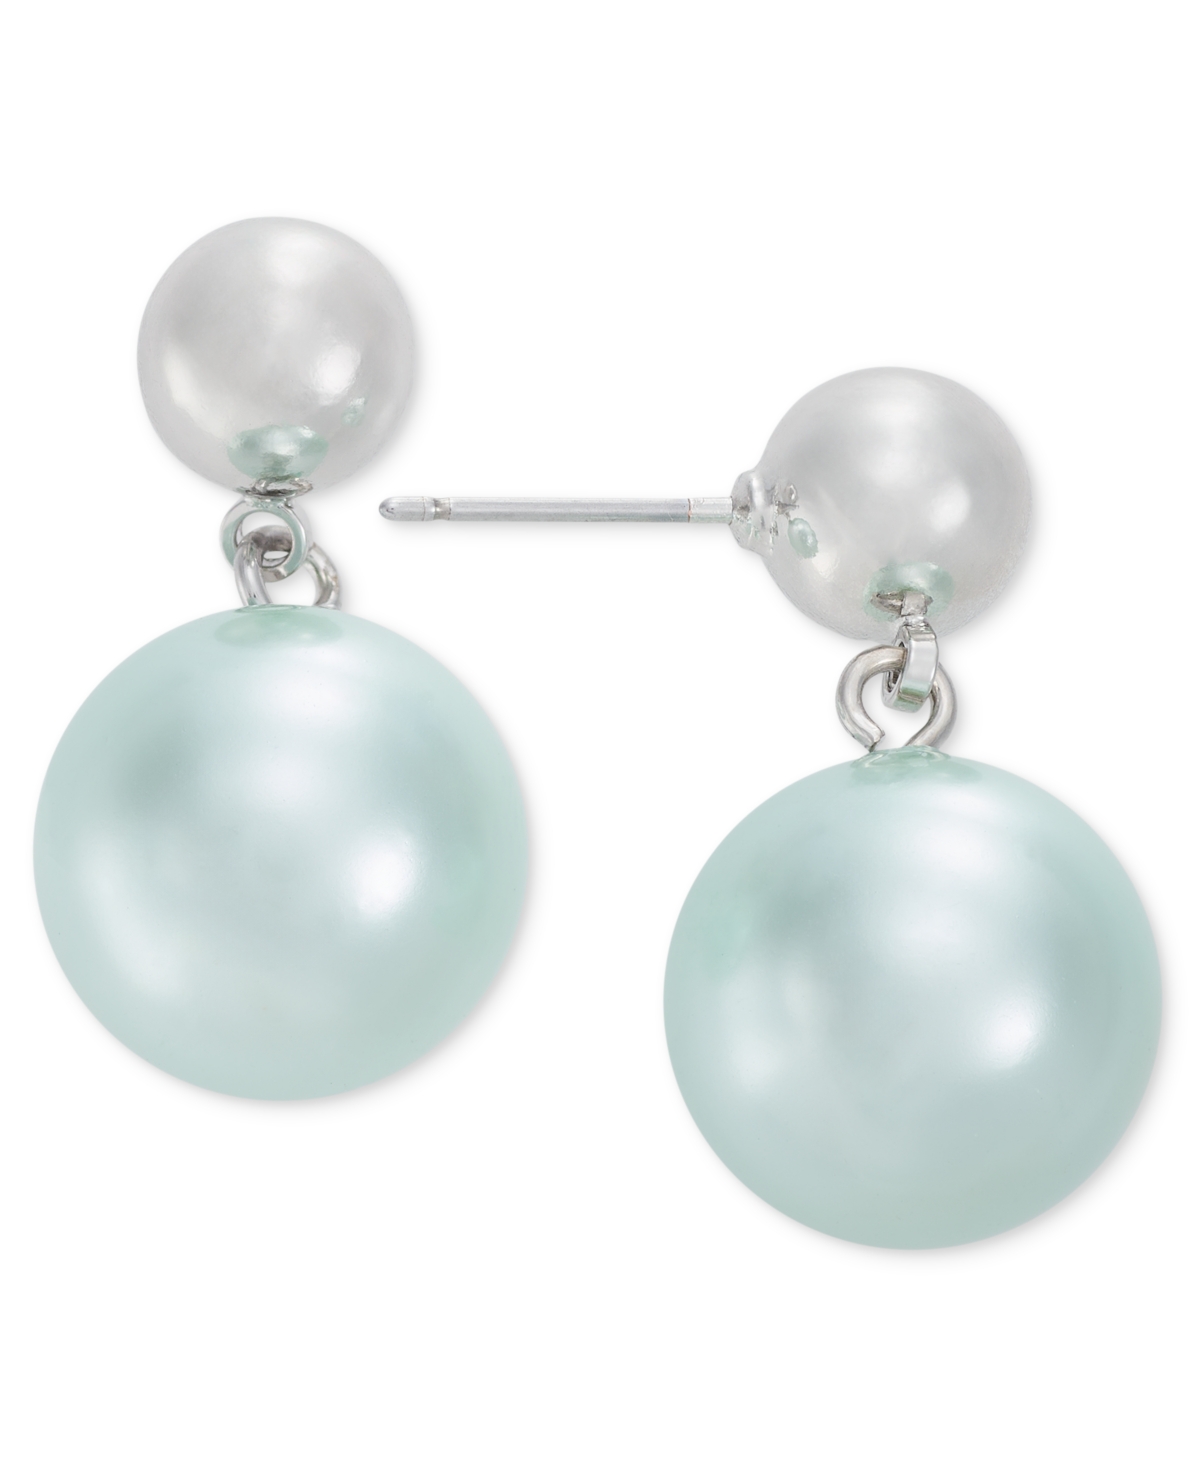 Silver-Tone Color Imitation Pearl Drop Earrings, Created for Macy's - Multi